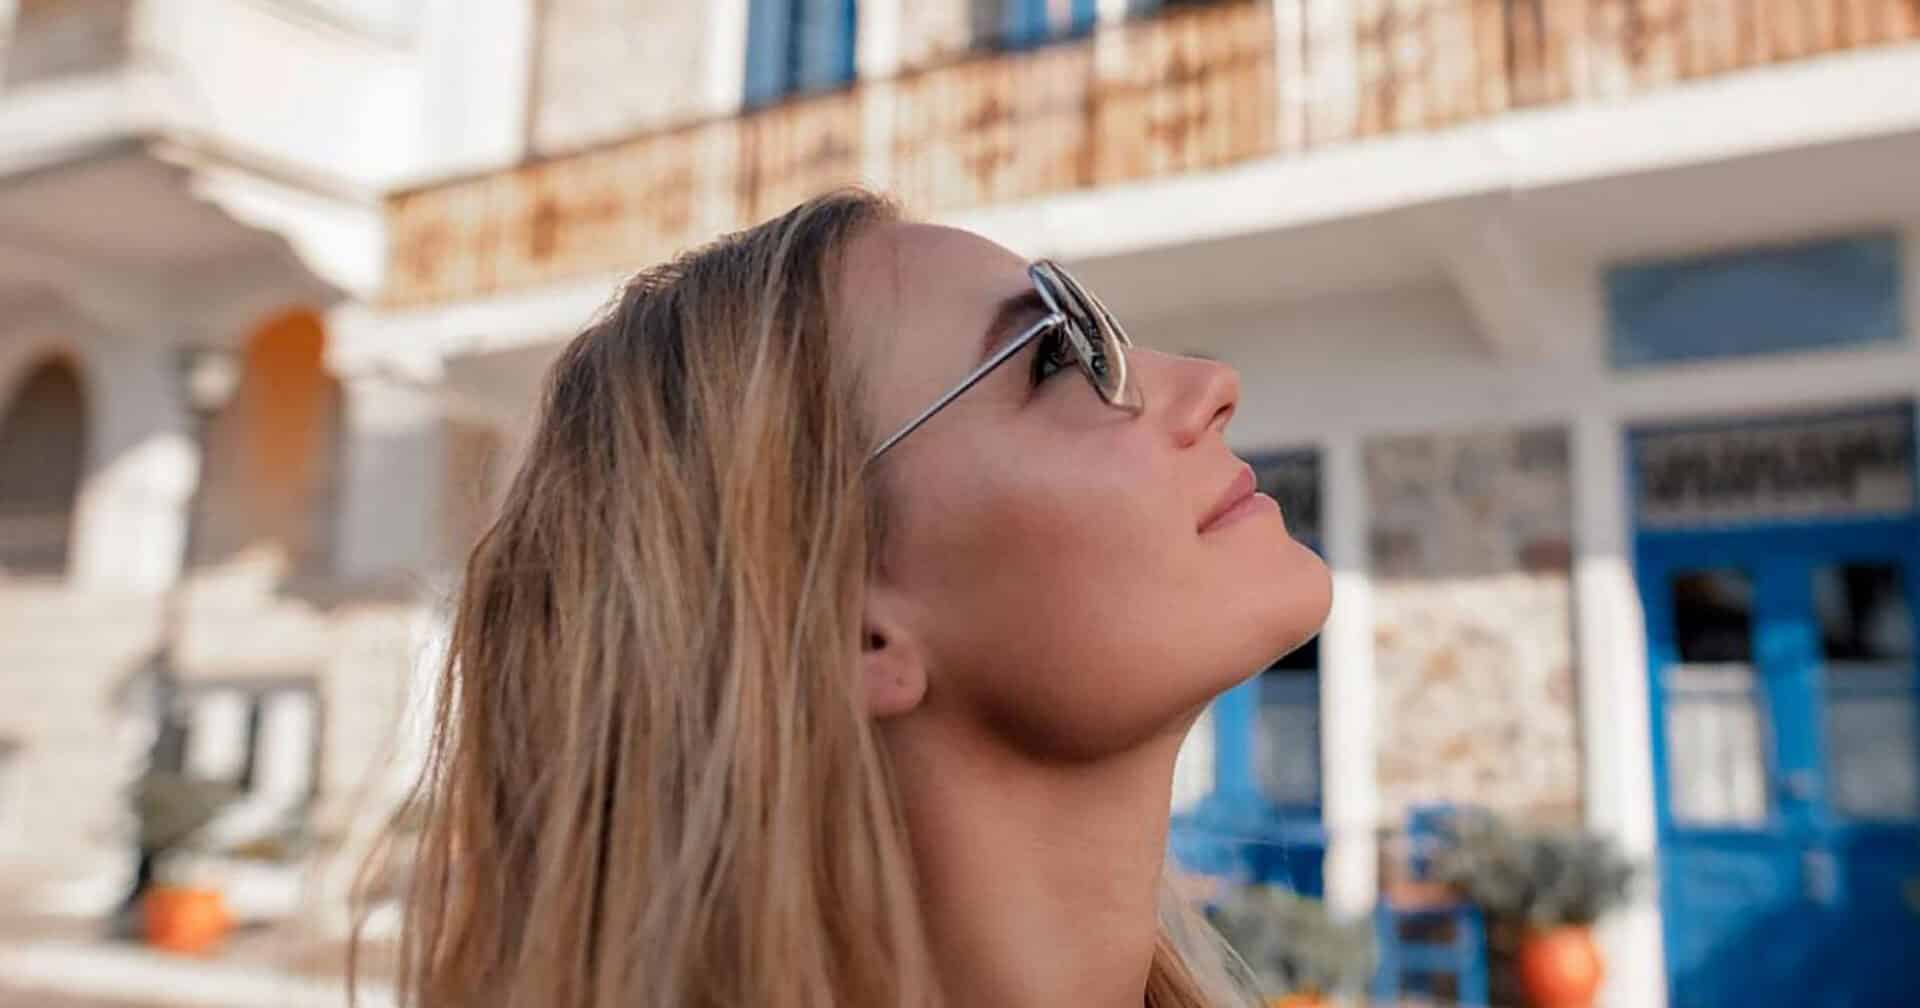 A girl in sunglasses looking up to the sky in front of a blue and white building